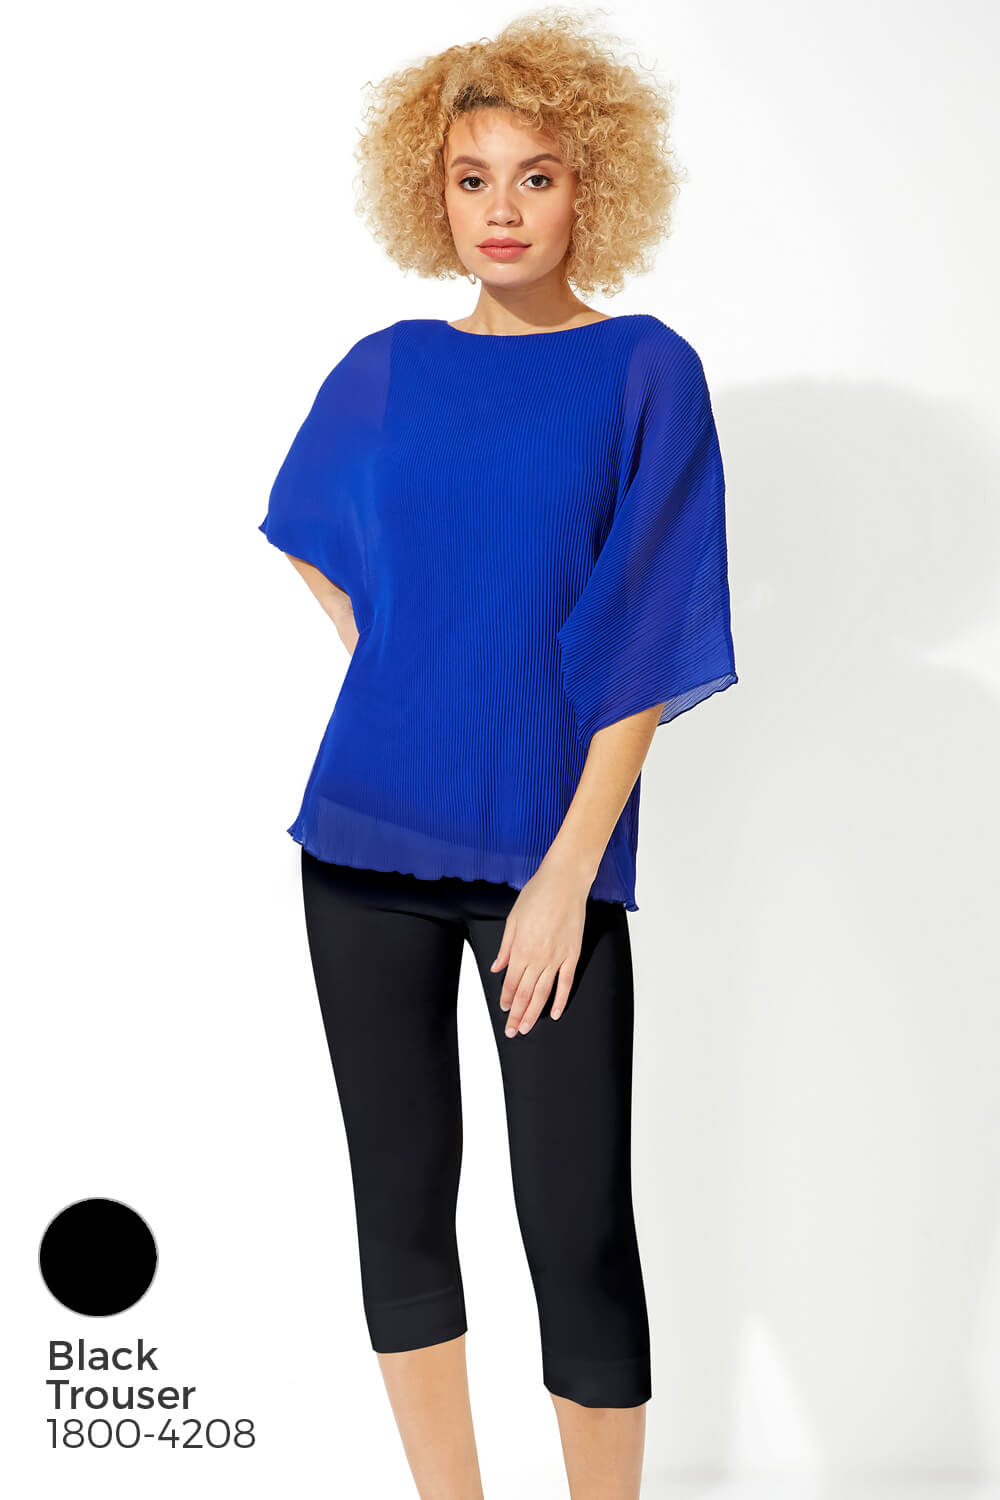 Royal Blue Pleated Chiffon Overlay Top, Image 8 of 8